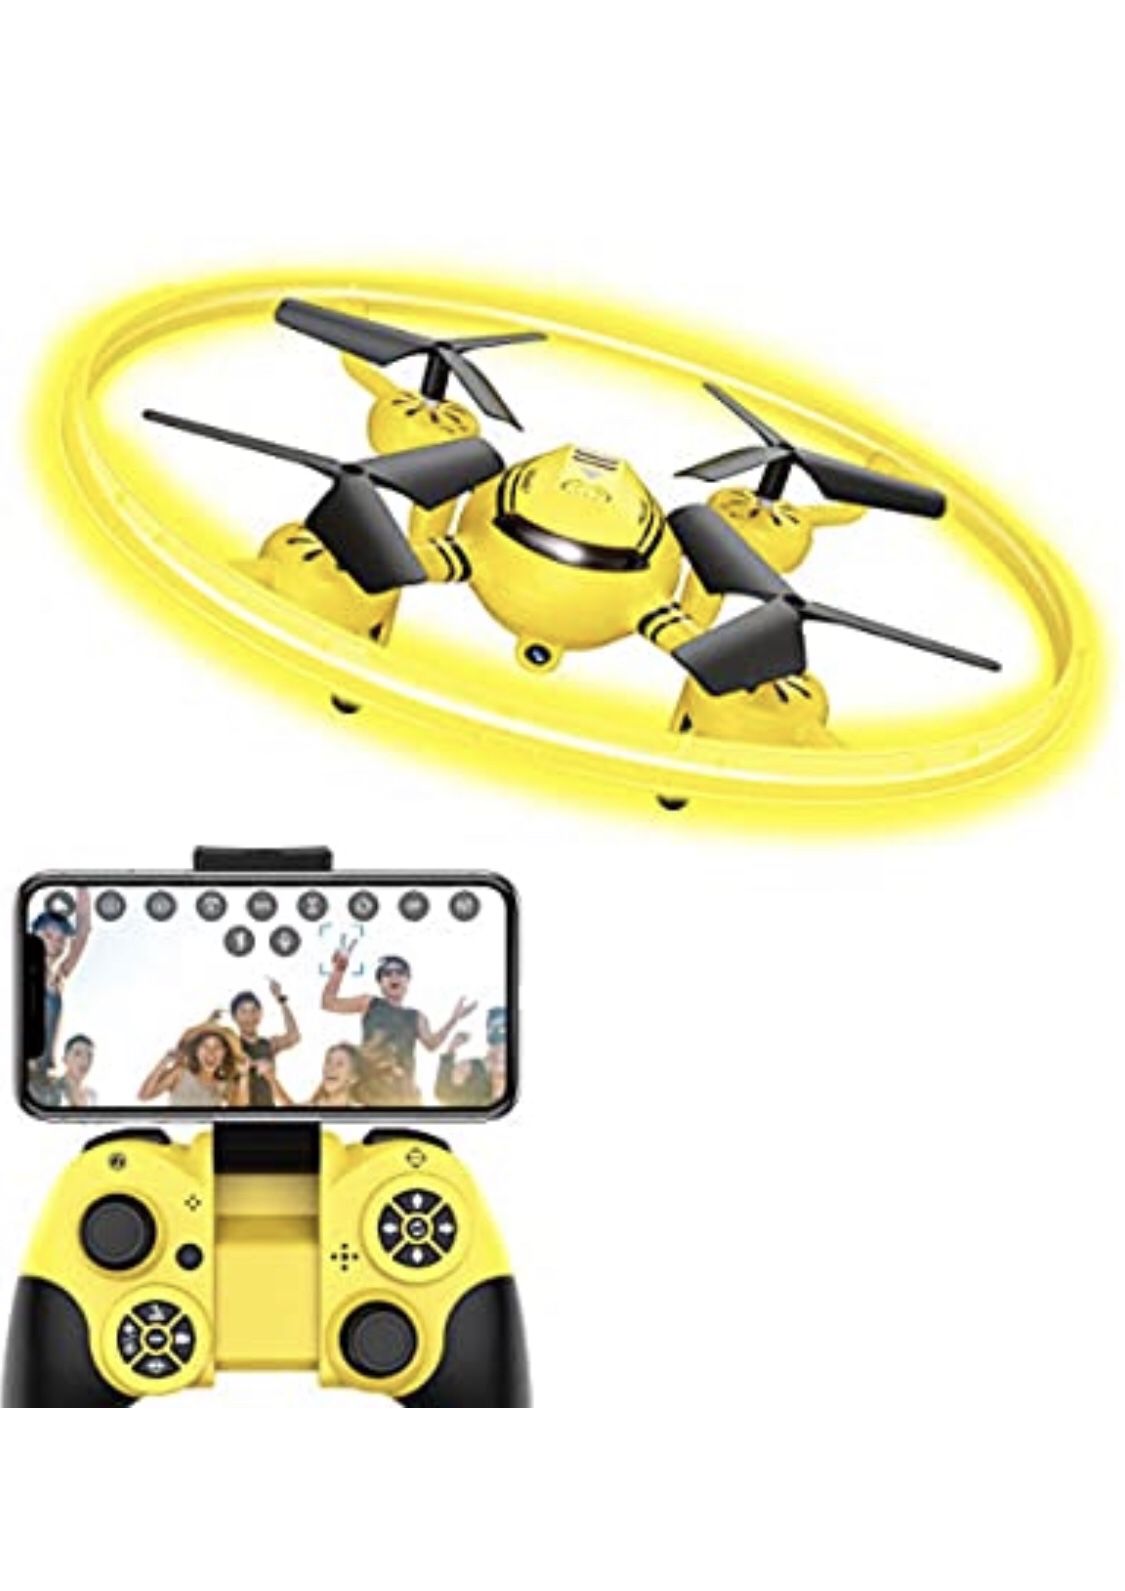 Q8 FPV Drone with Camera for Kids Adults,RC Drones for Kids,Quadcopter with Yellow Light,Altitude Hold,Gravity Sensor and Remote Control